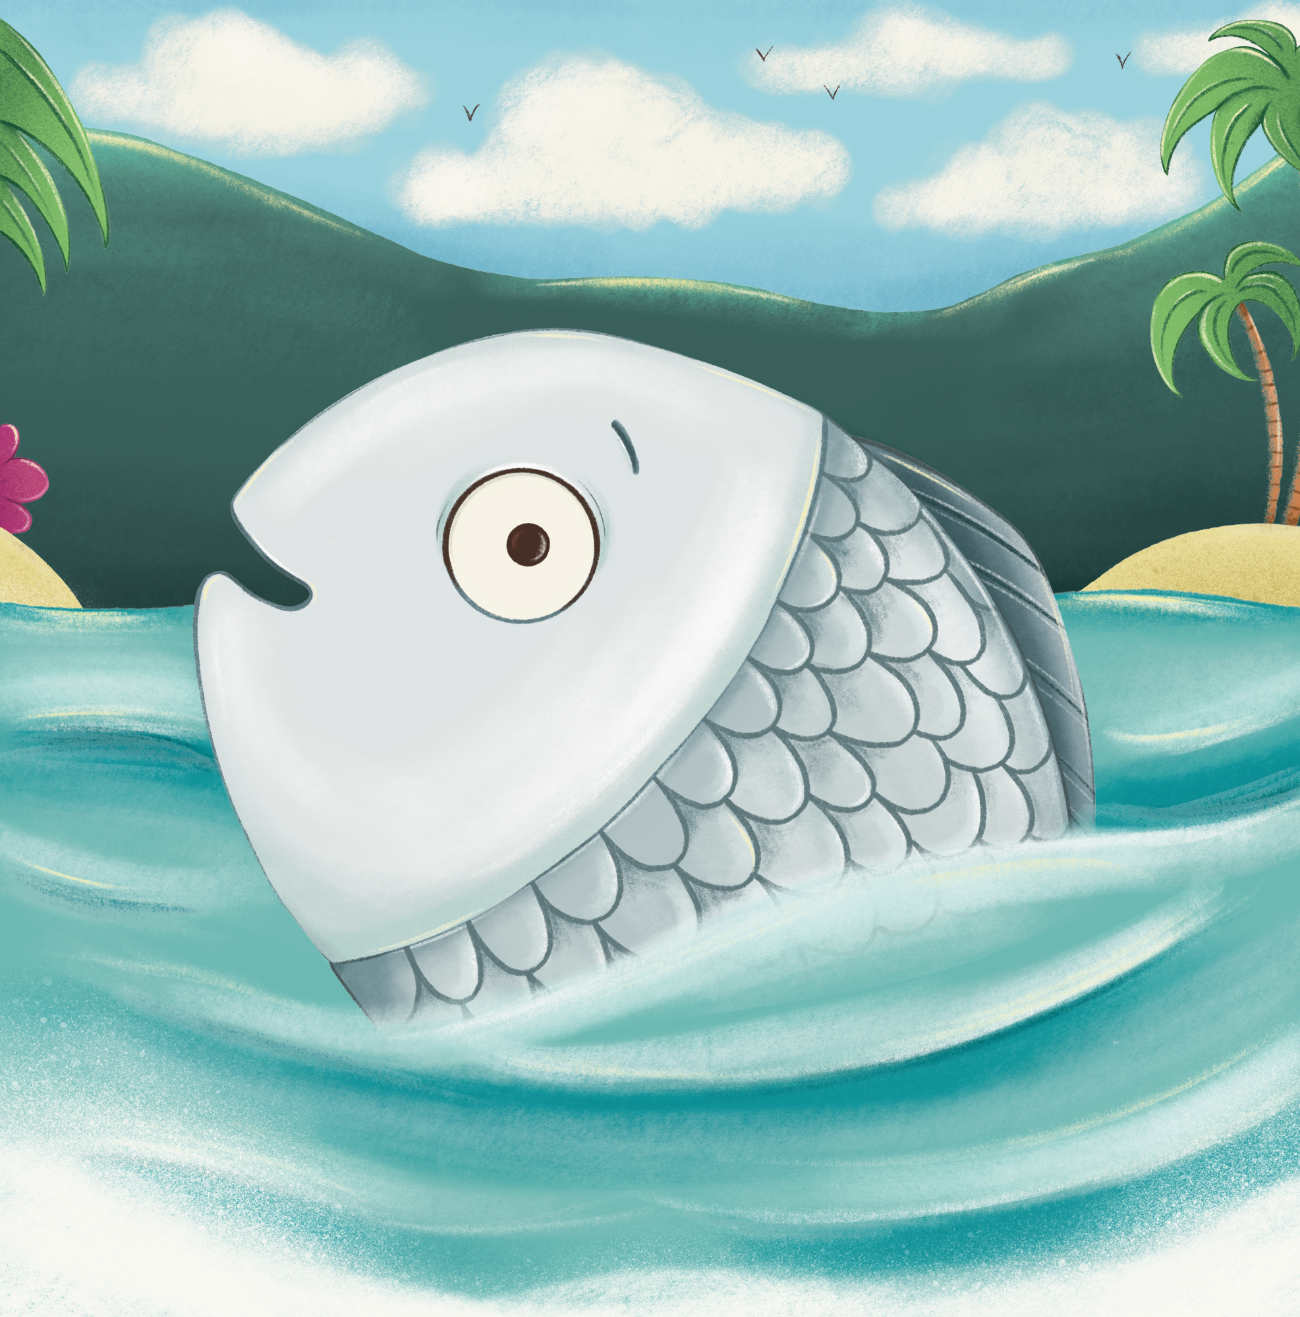 Bedtime Stories Lulah the Fish and the Whale by Jade Maitre short stories for kids page 12